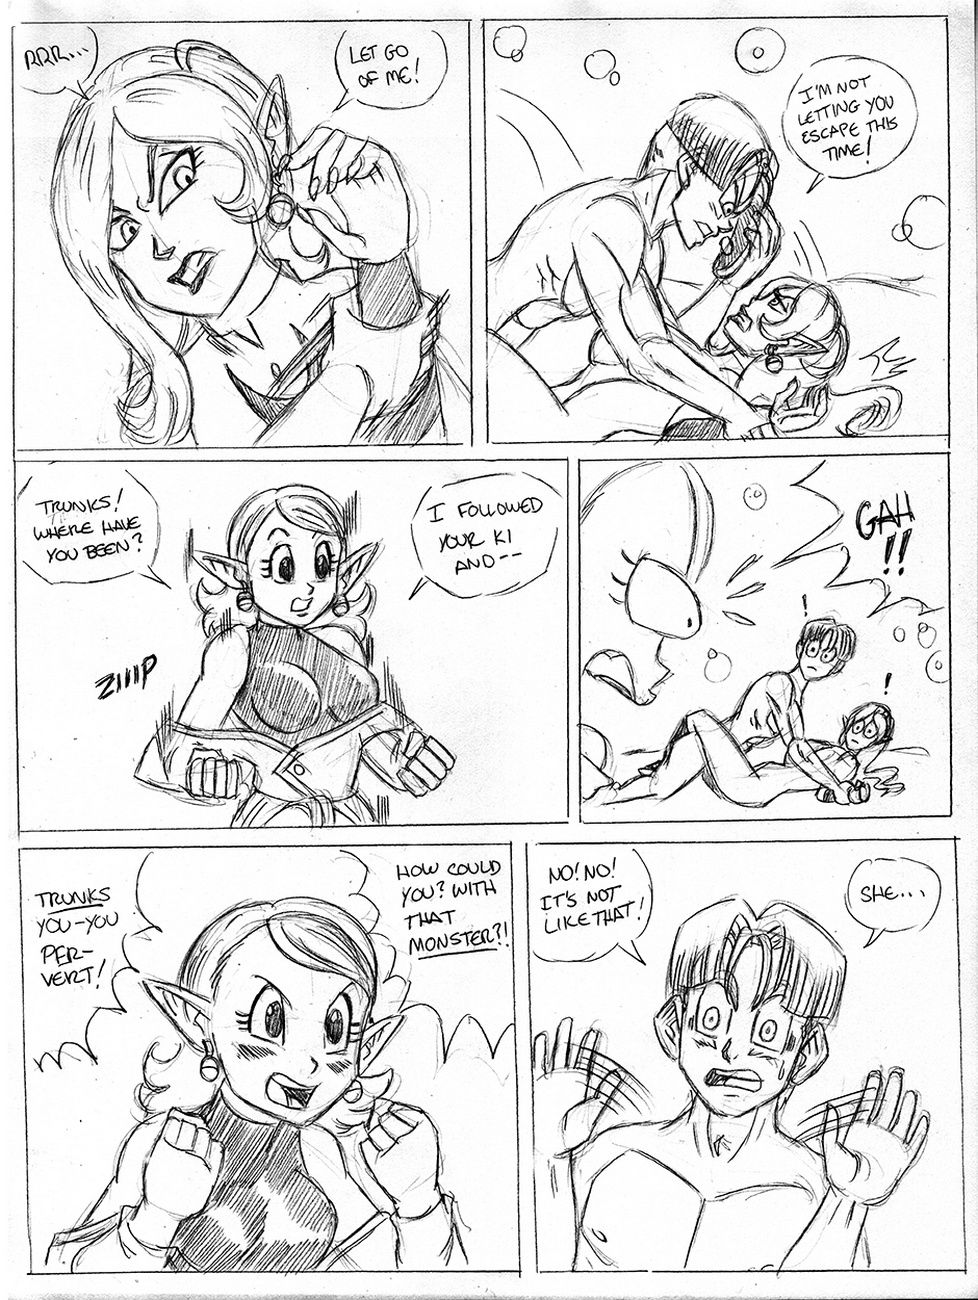 Trunks And Towa page 7